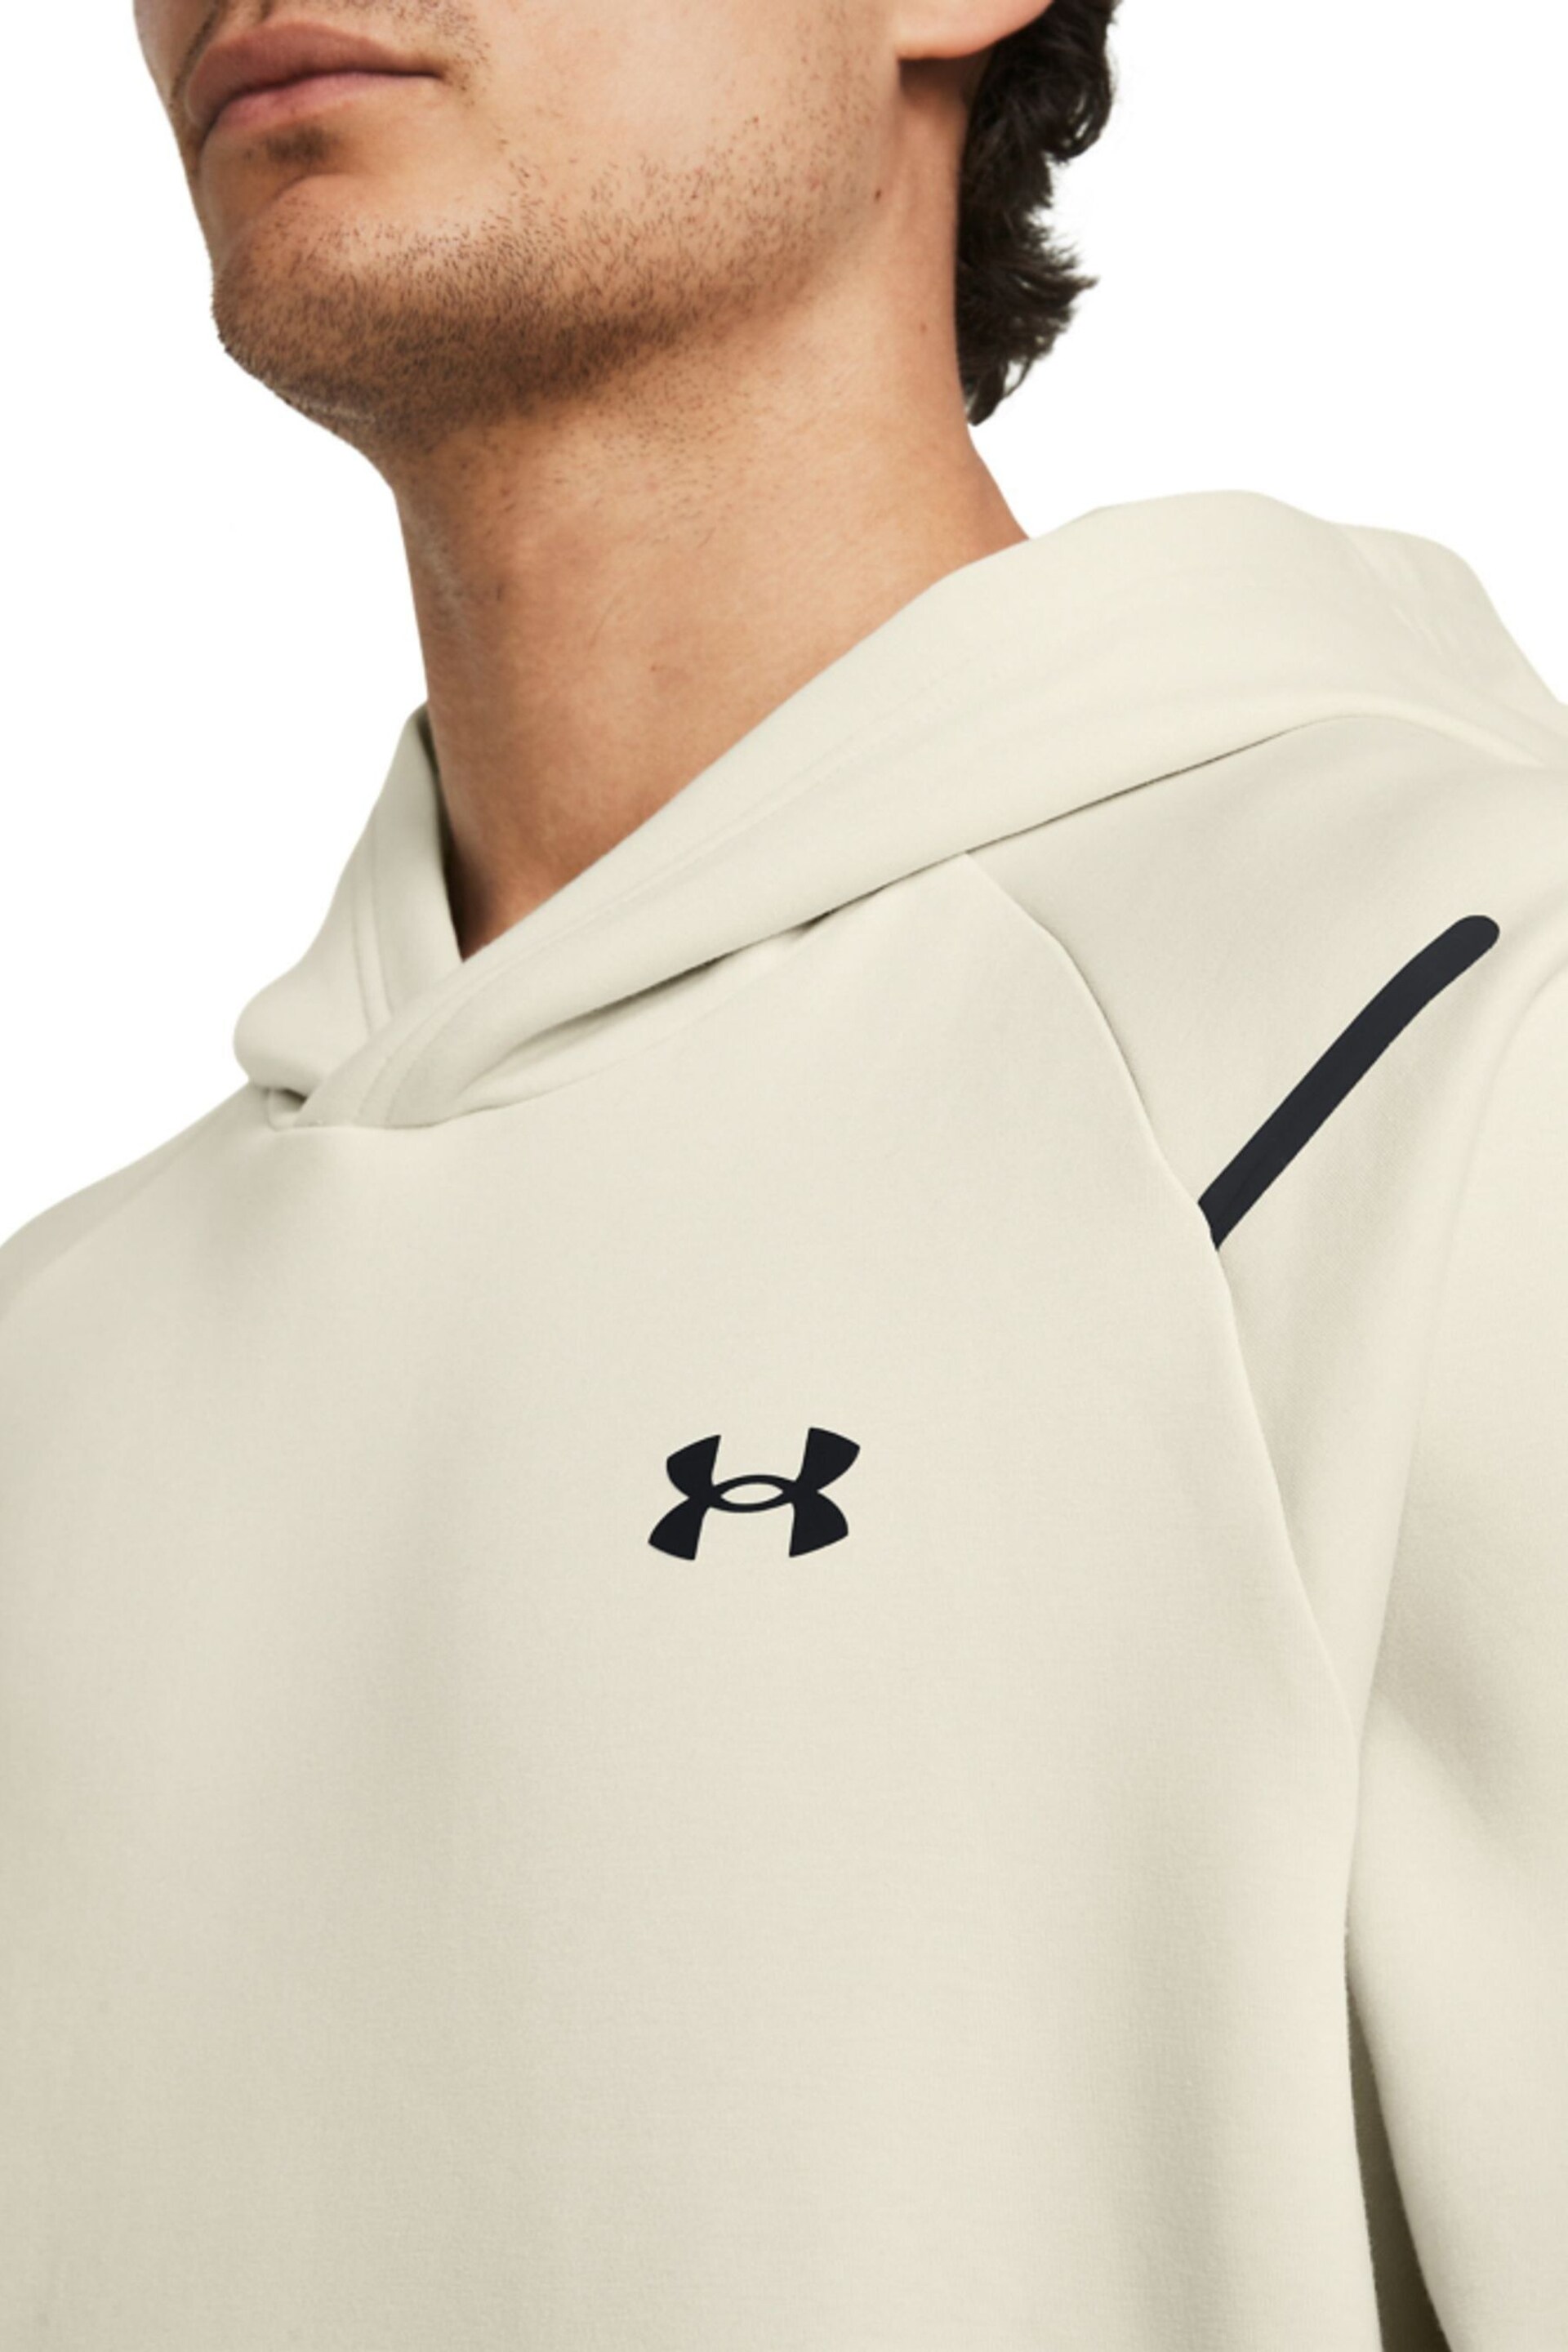 Under Armour Cream Unstoppable Fleece Hoodie - Image 4 of 5